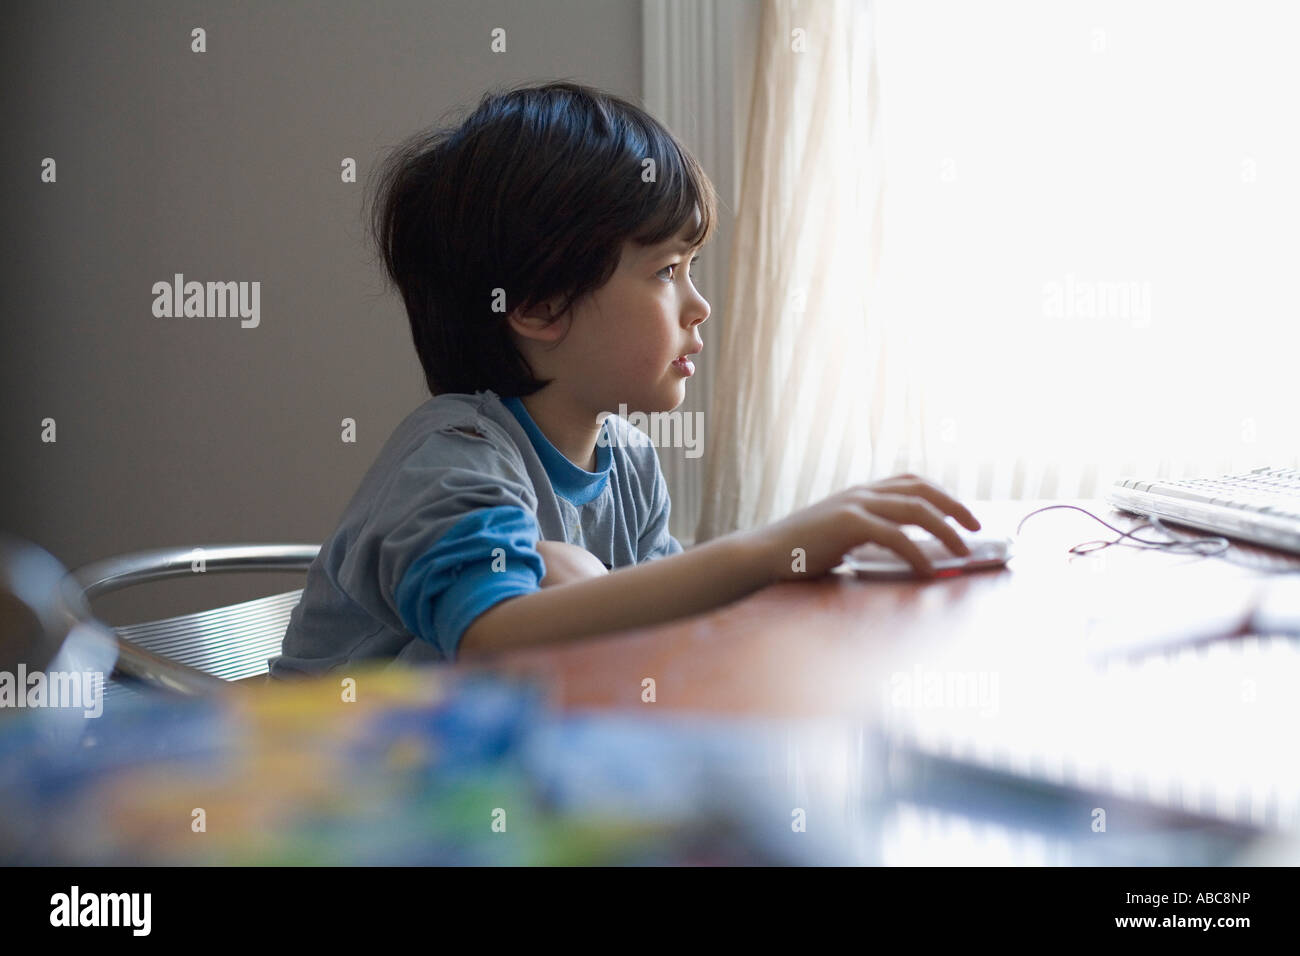 Young Boy in pajamas playing computer game at home. Model Released Stock Photo